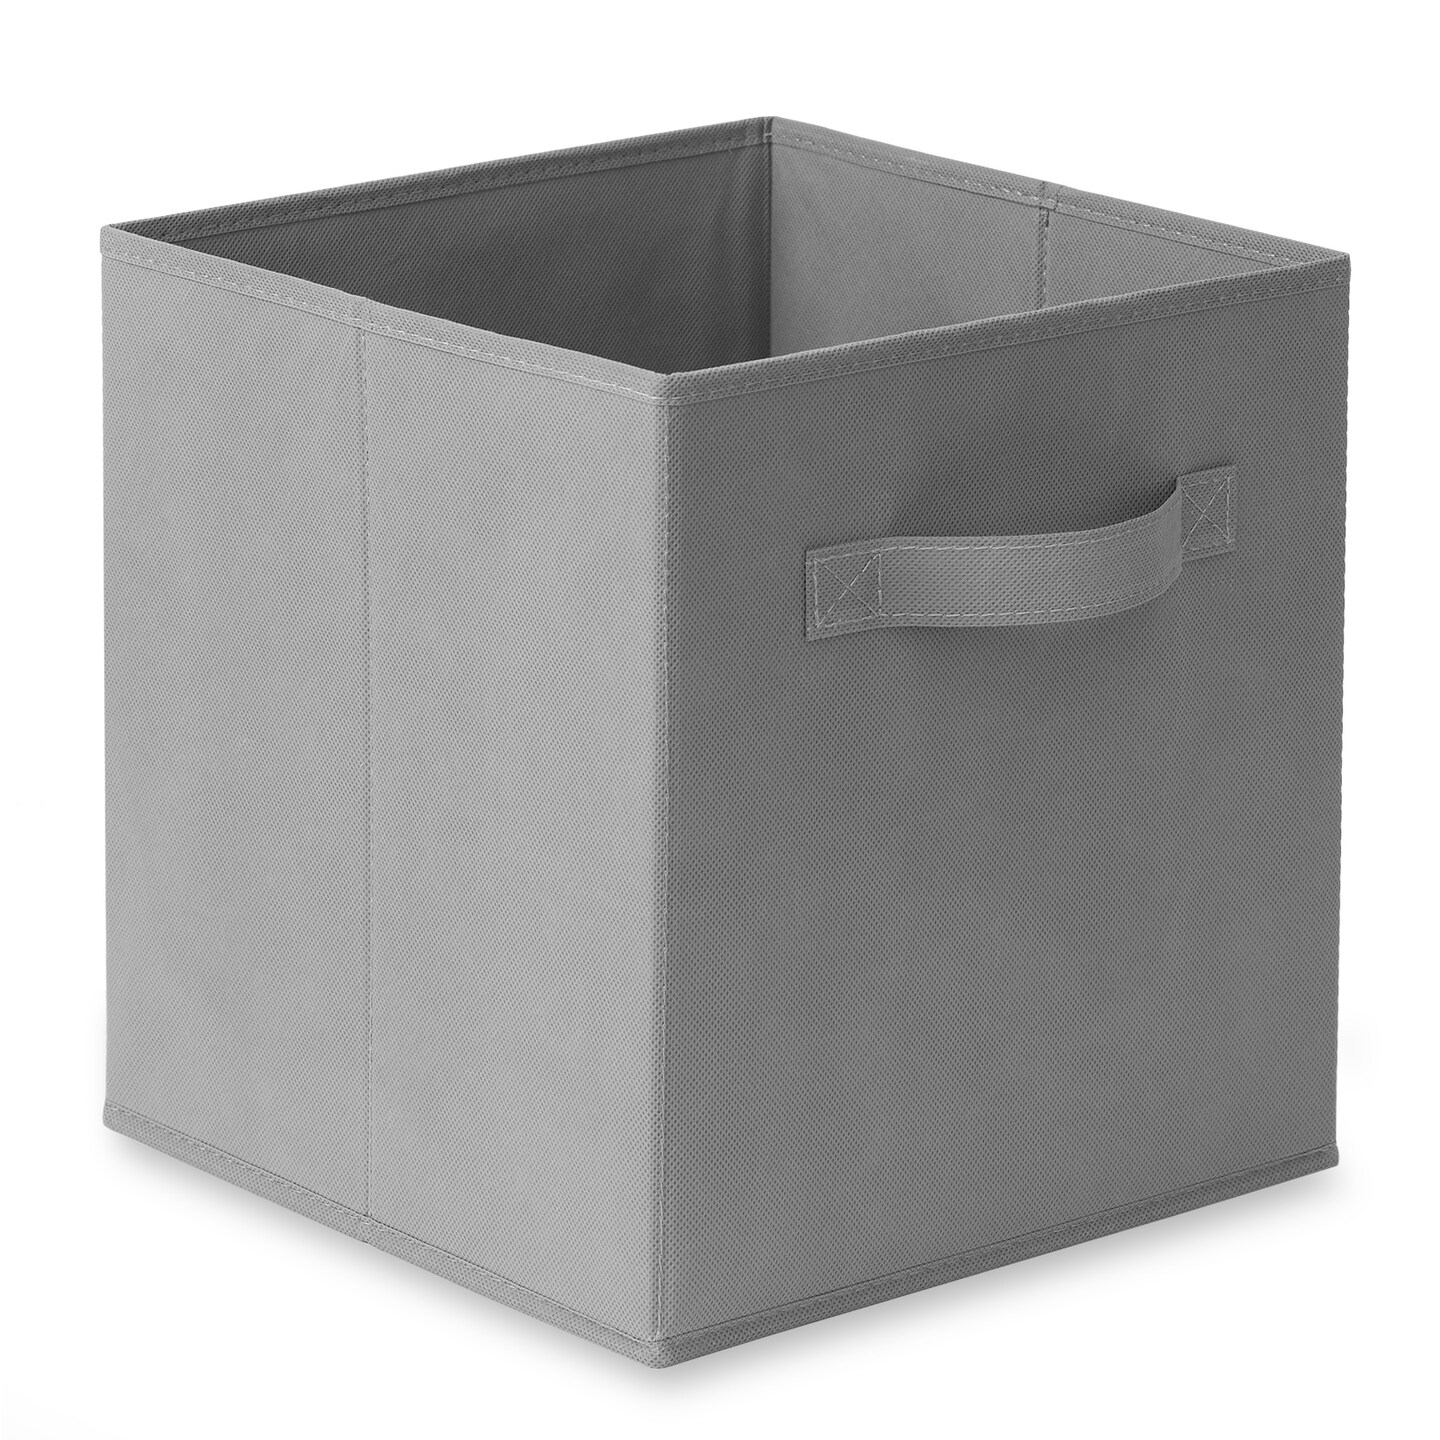 Casafield Set of 6 Collapsible Fabric Cube Storage Bins - 11&#x22; Foldable Cloth Baskets for Shelves, Cubby Organizers &#x26; More